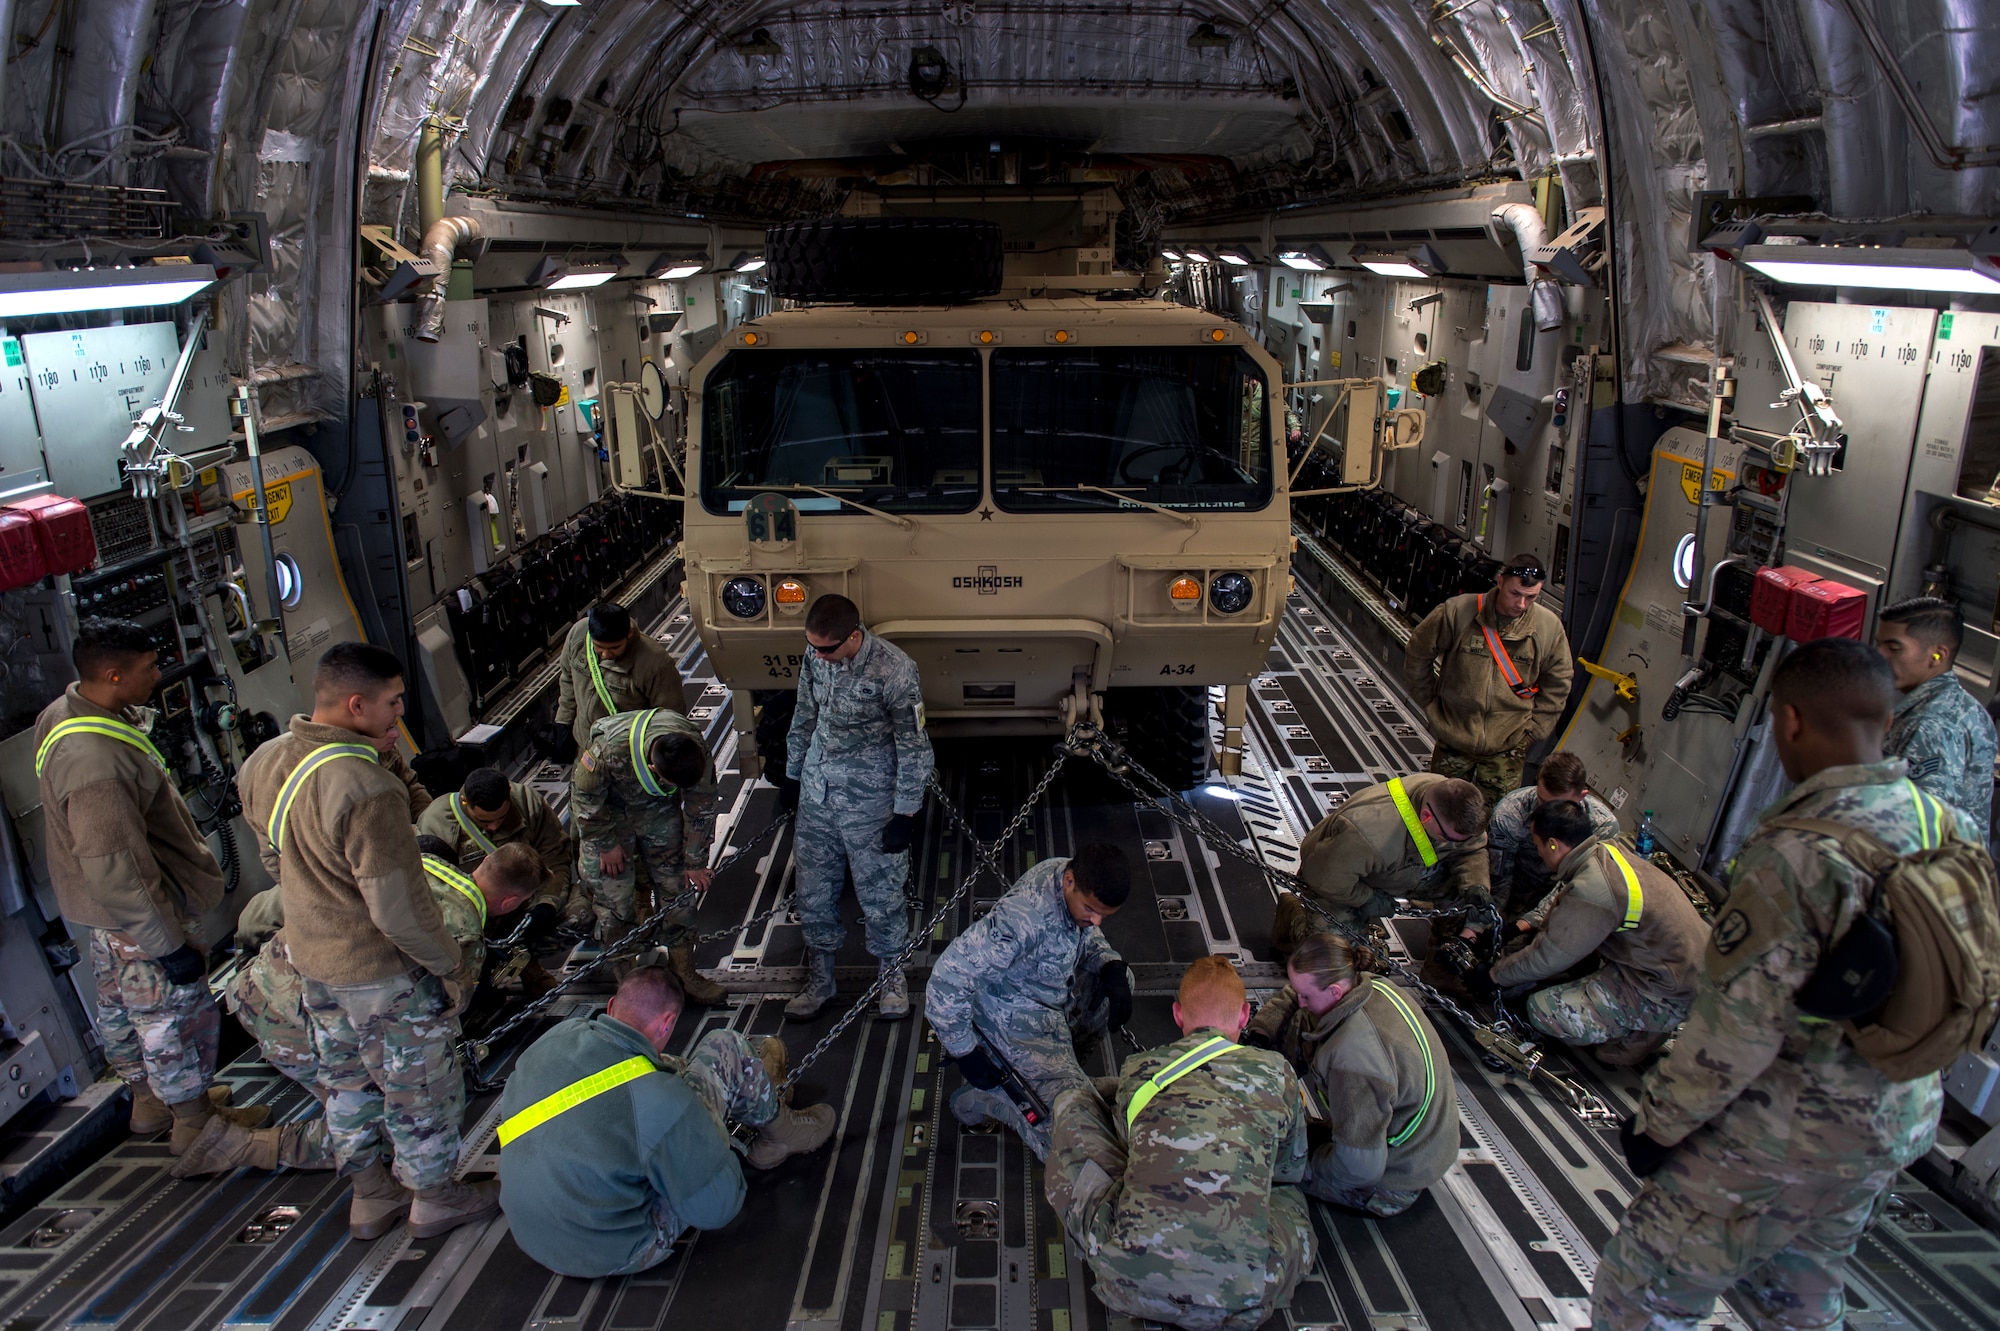 U.S. Army Soldiers assigned to Ft. Sill, Okla., and U.S. Air Force Airmen stationed at Altus Air Force Base, Okla., practice securing a vehicle inside a C-17 Globemaster III